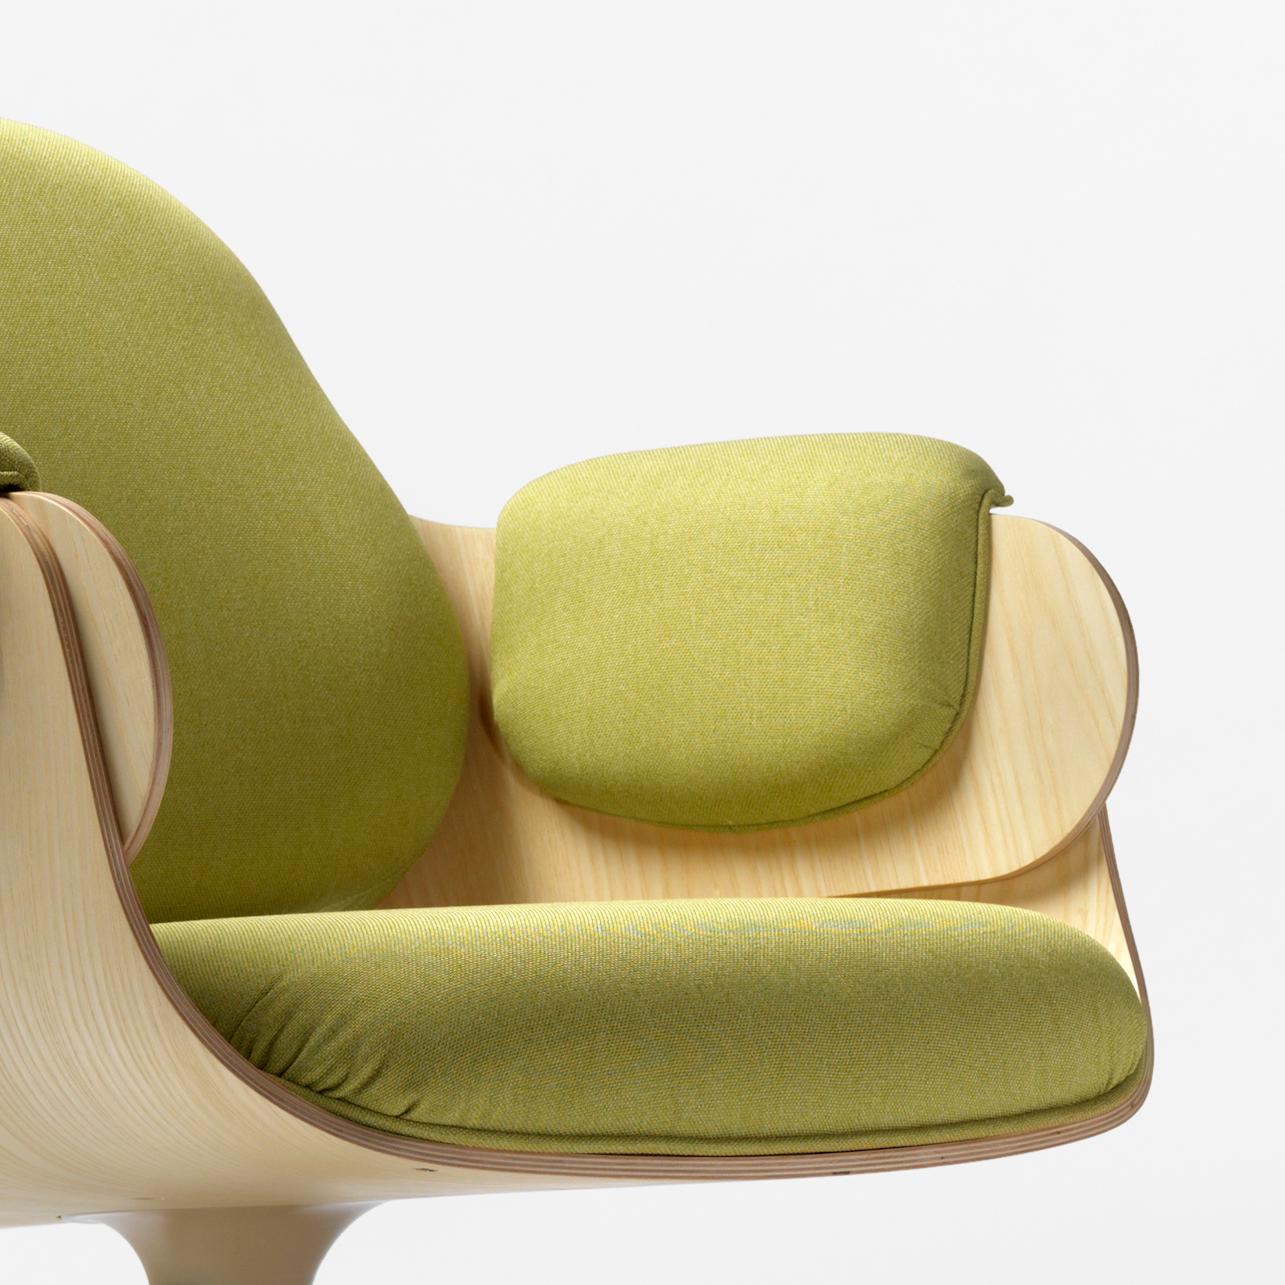 Modern Jaime Hayon, Contemporary, Ash, Pistachio Upholstery Low Lounger Armchair For Sale